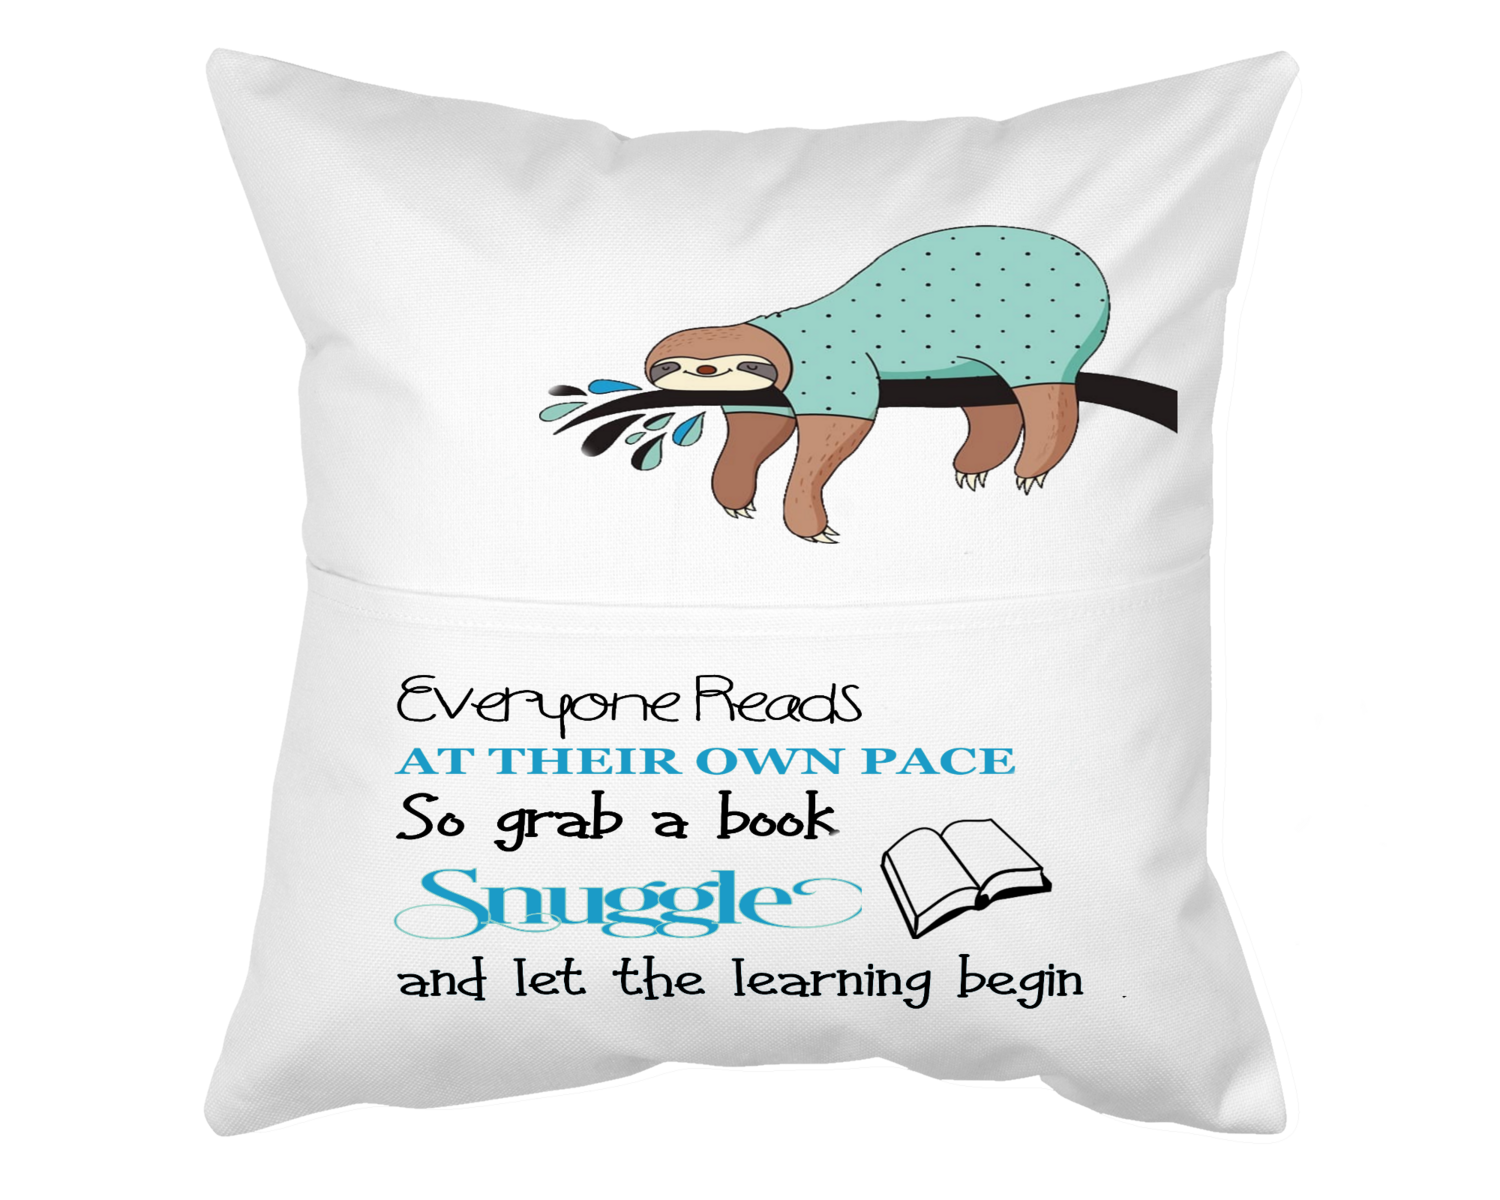 Pillow with Pocket: EVERYONE READS AT THEIR OWN PACE, SO GRAB A BOOK, SNUGGLE AND LET THE LEARNING BEGIN